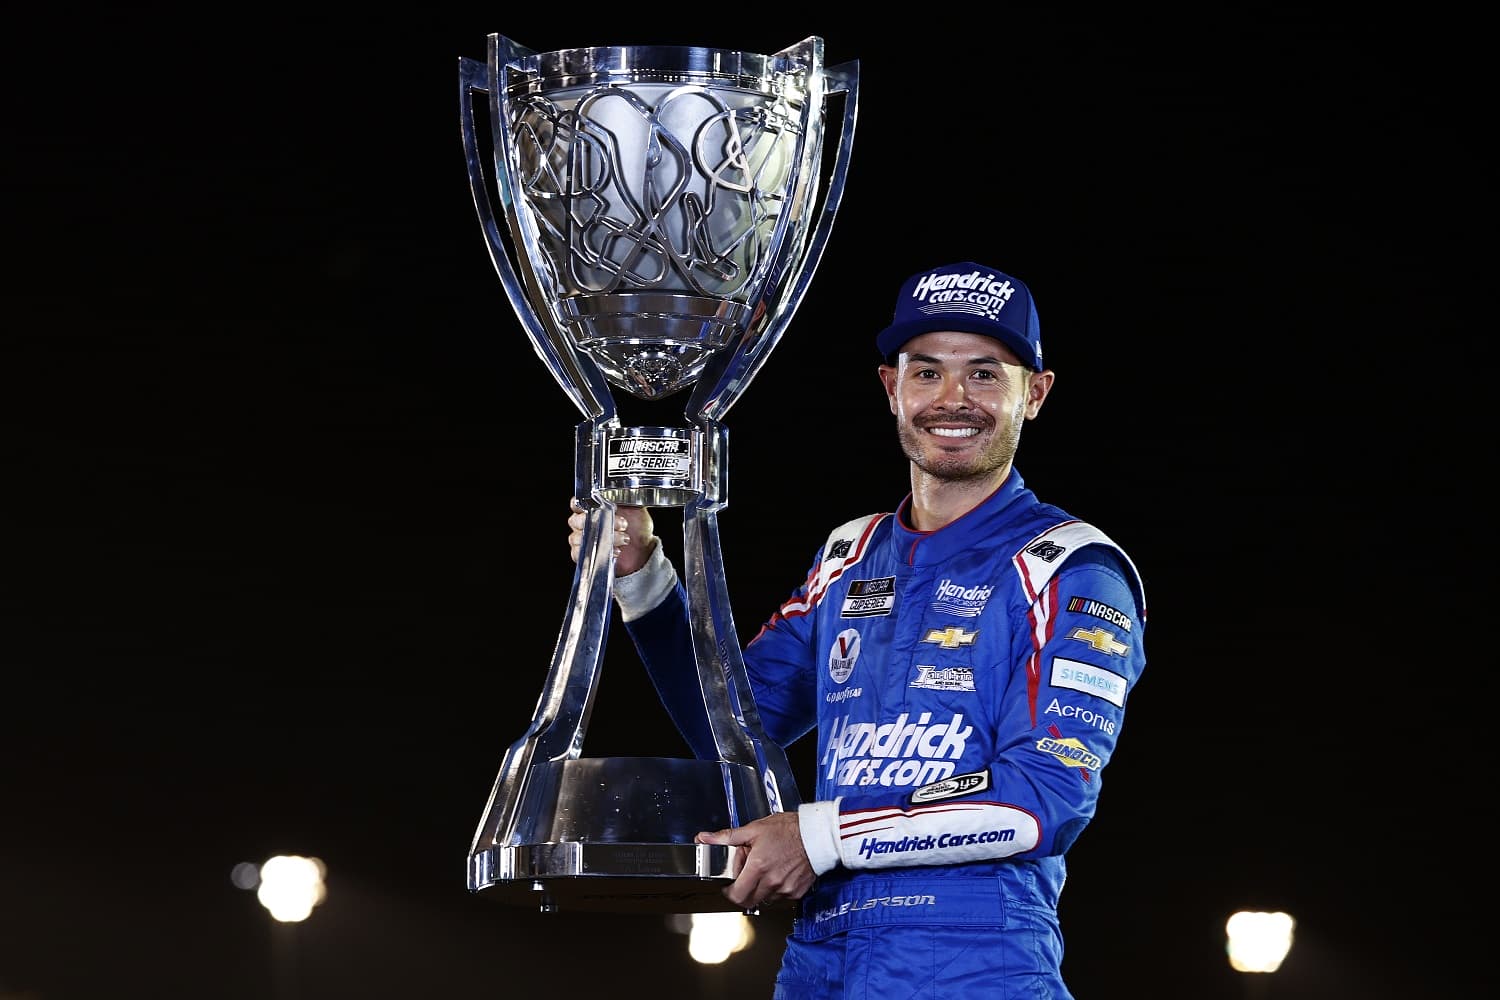 5 Key Moments in Kyle Larson’s Career as He Chases His 2nd NASCAR Championship